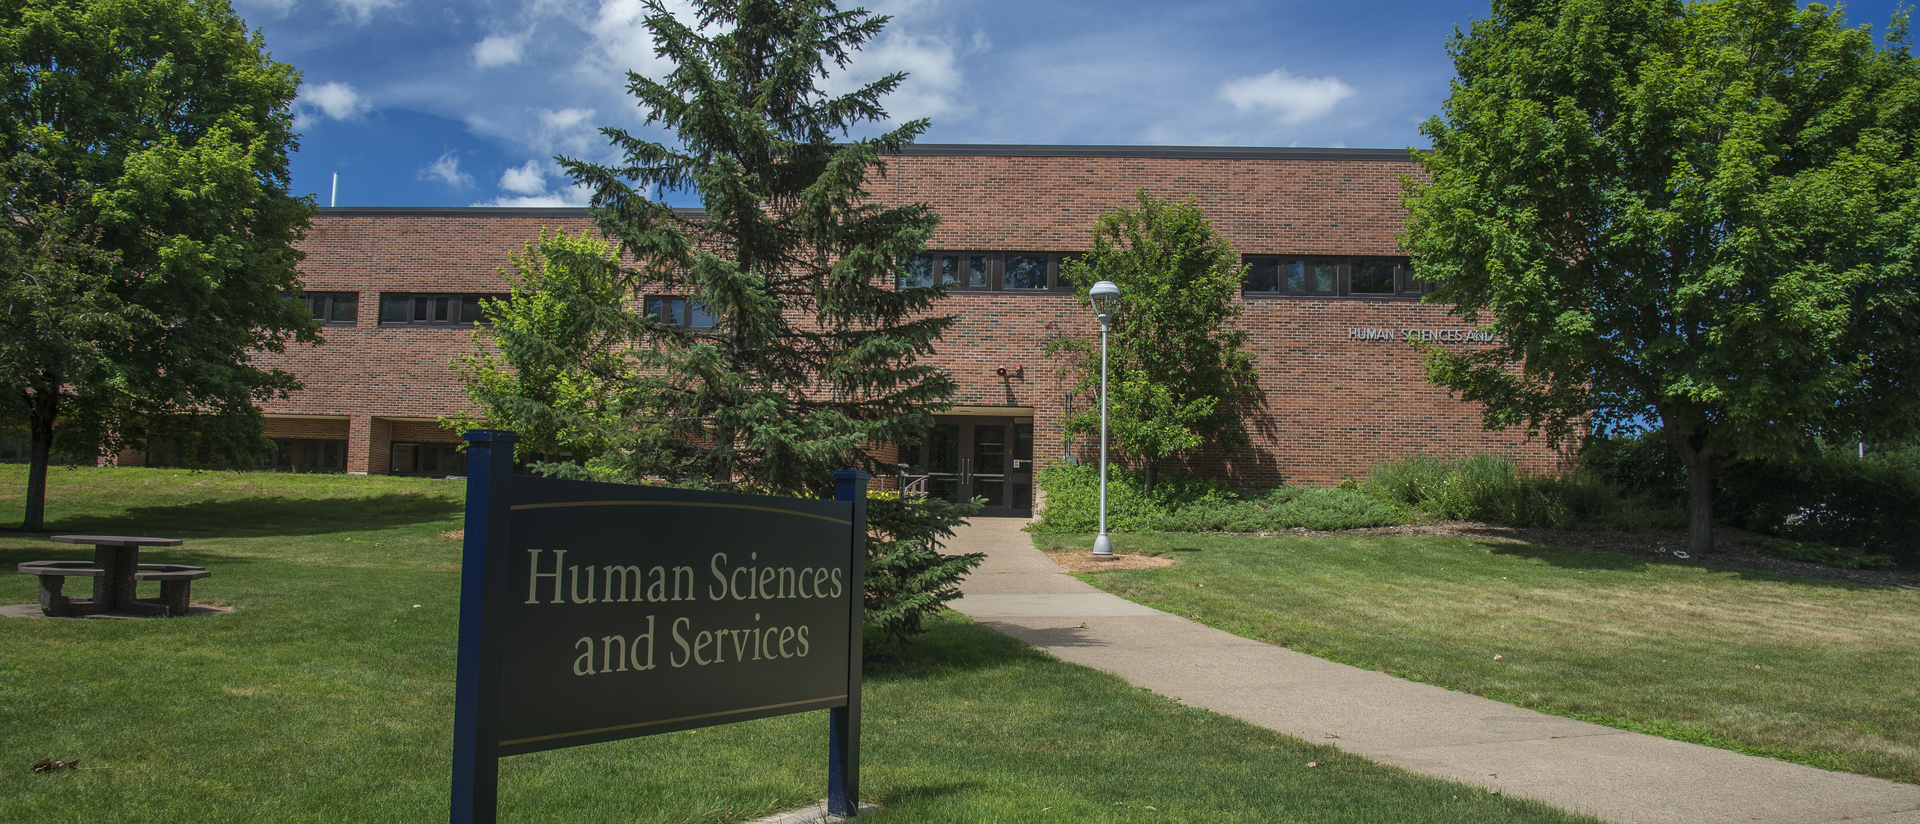 Human Sciences and Services building